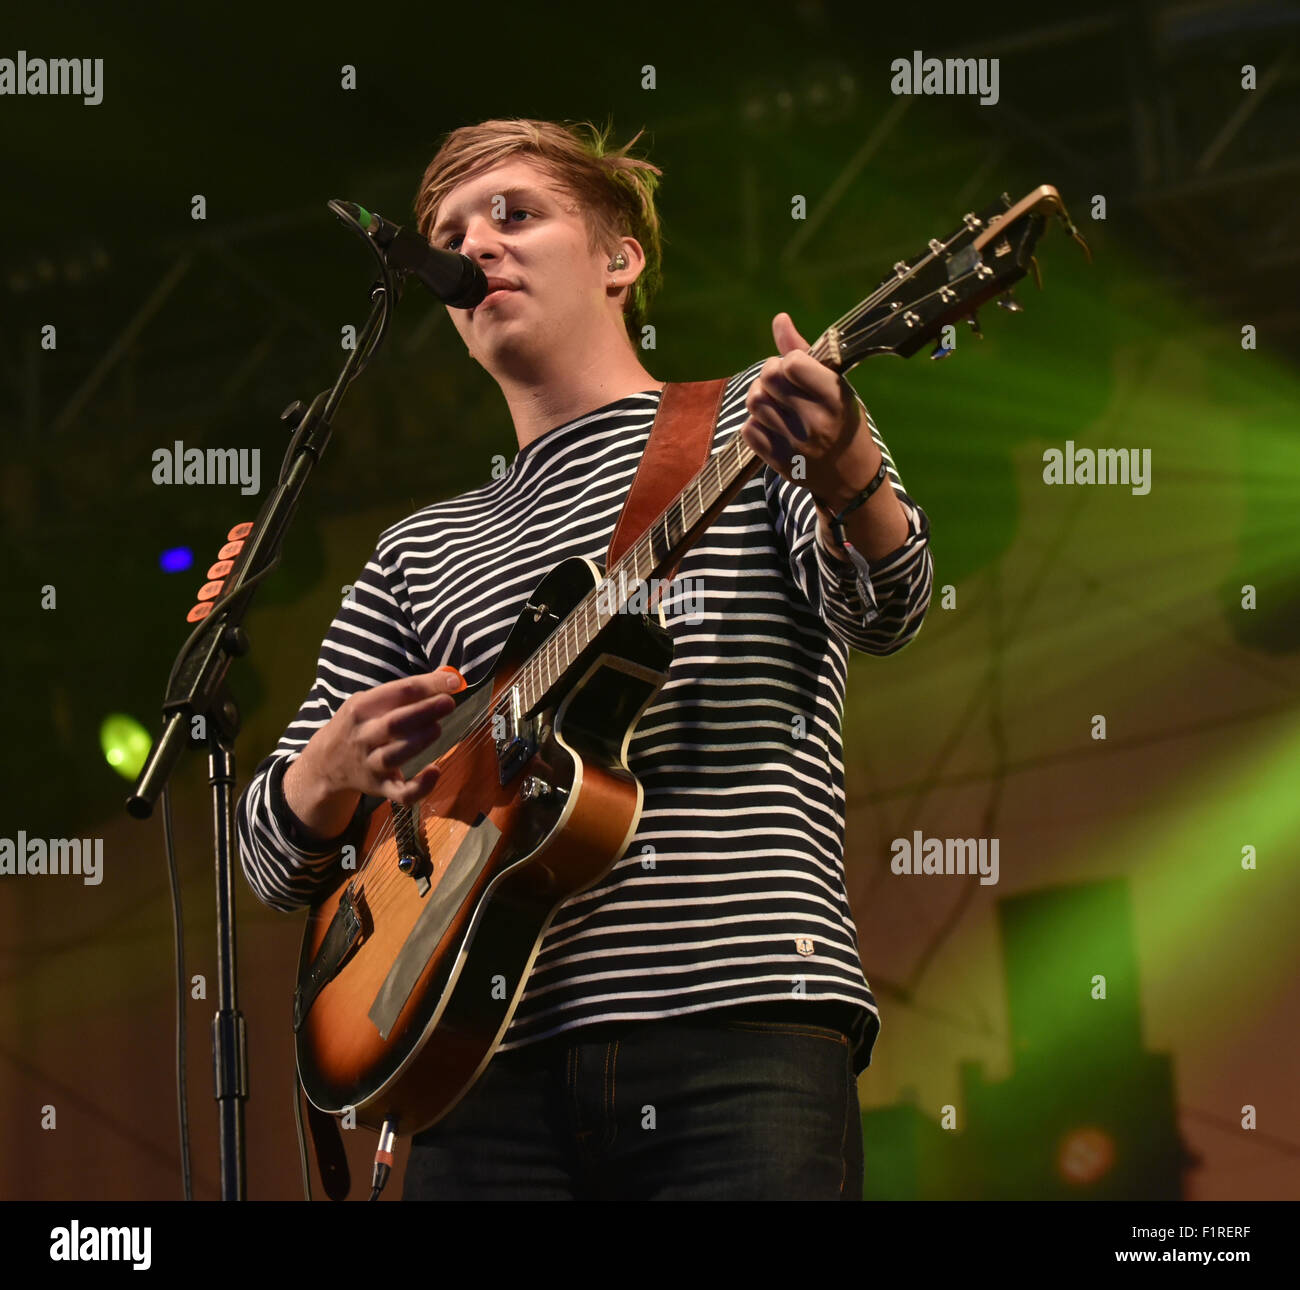 St Helier, Jersey, nelle Isole del Canale, UK. 06 Sep, 2015. George Ezra esibirsi sul palco principale stadio in Jersey Live Festival data06/09/2015 Credit: charlie bryan/Alamy Live News Foto Stock